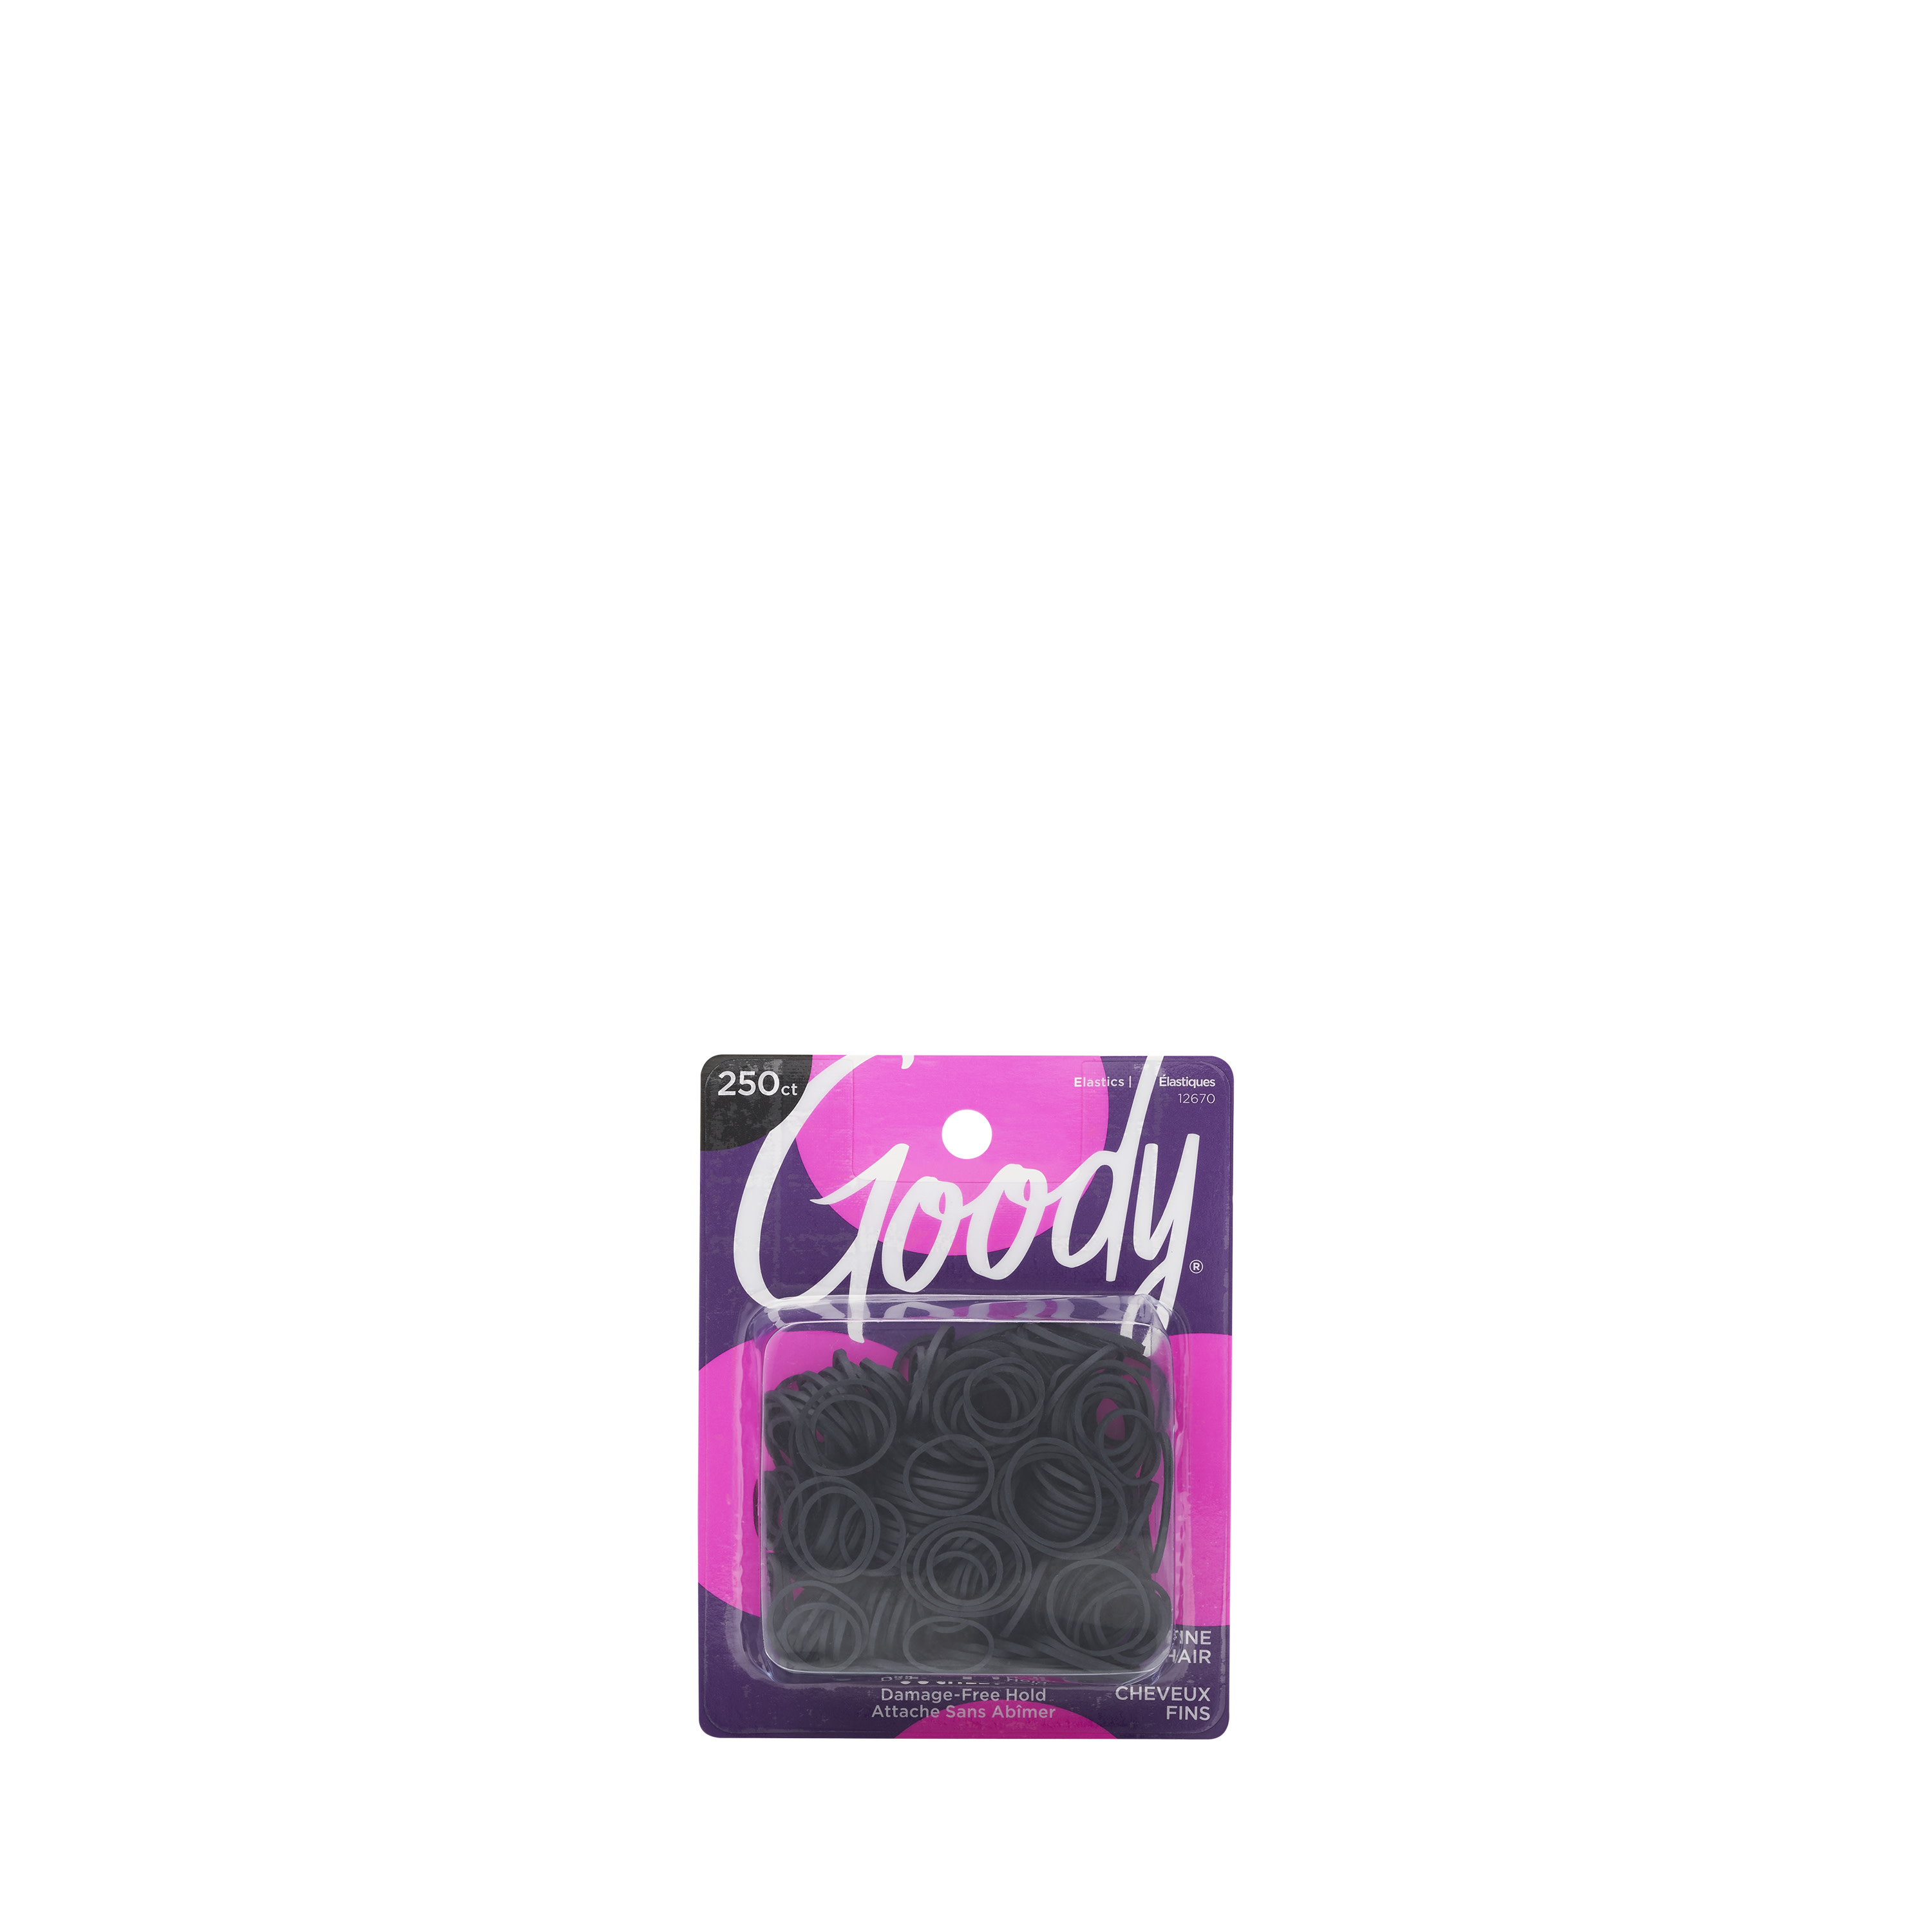 Goody Black Mini Rubberbands, All-Day Hold 250Ct Fine Hair - image 1 of 6